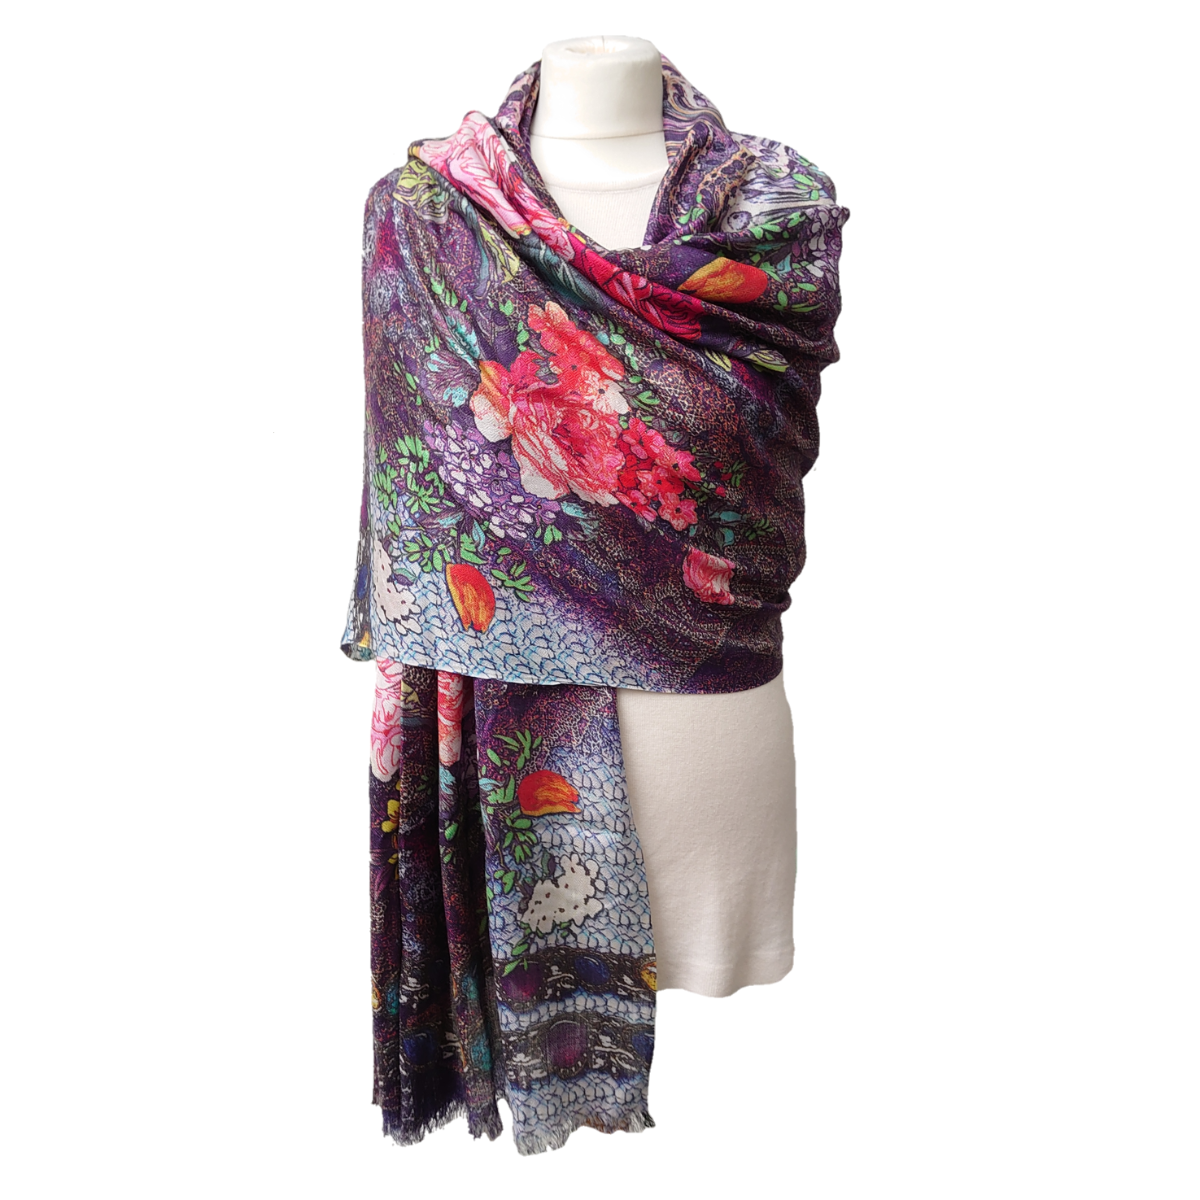 Fine Pashmina Stole - Large Scarf - Shades Of Purple With Flowers